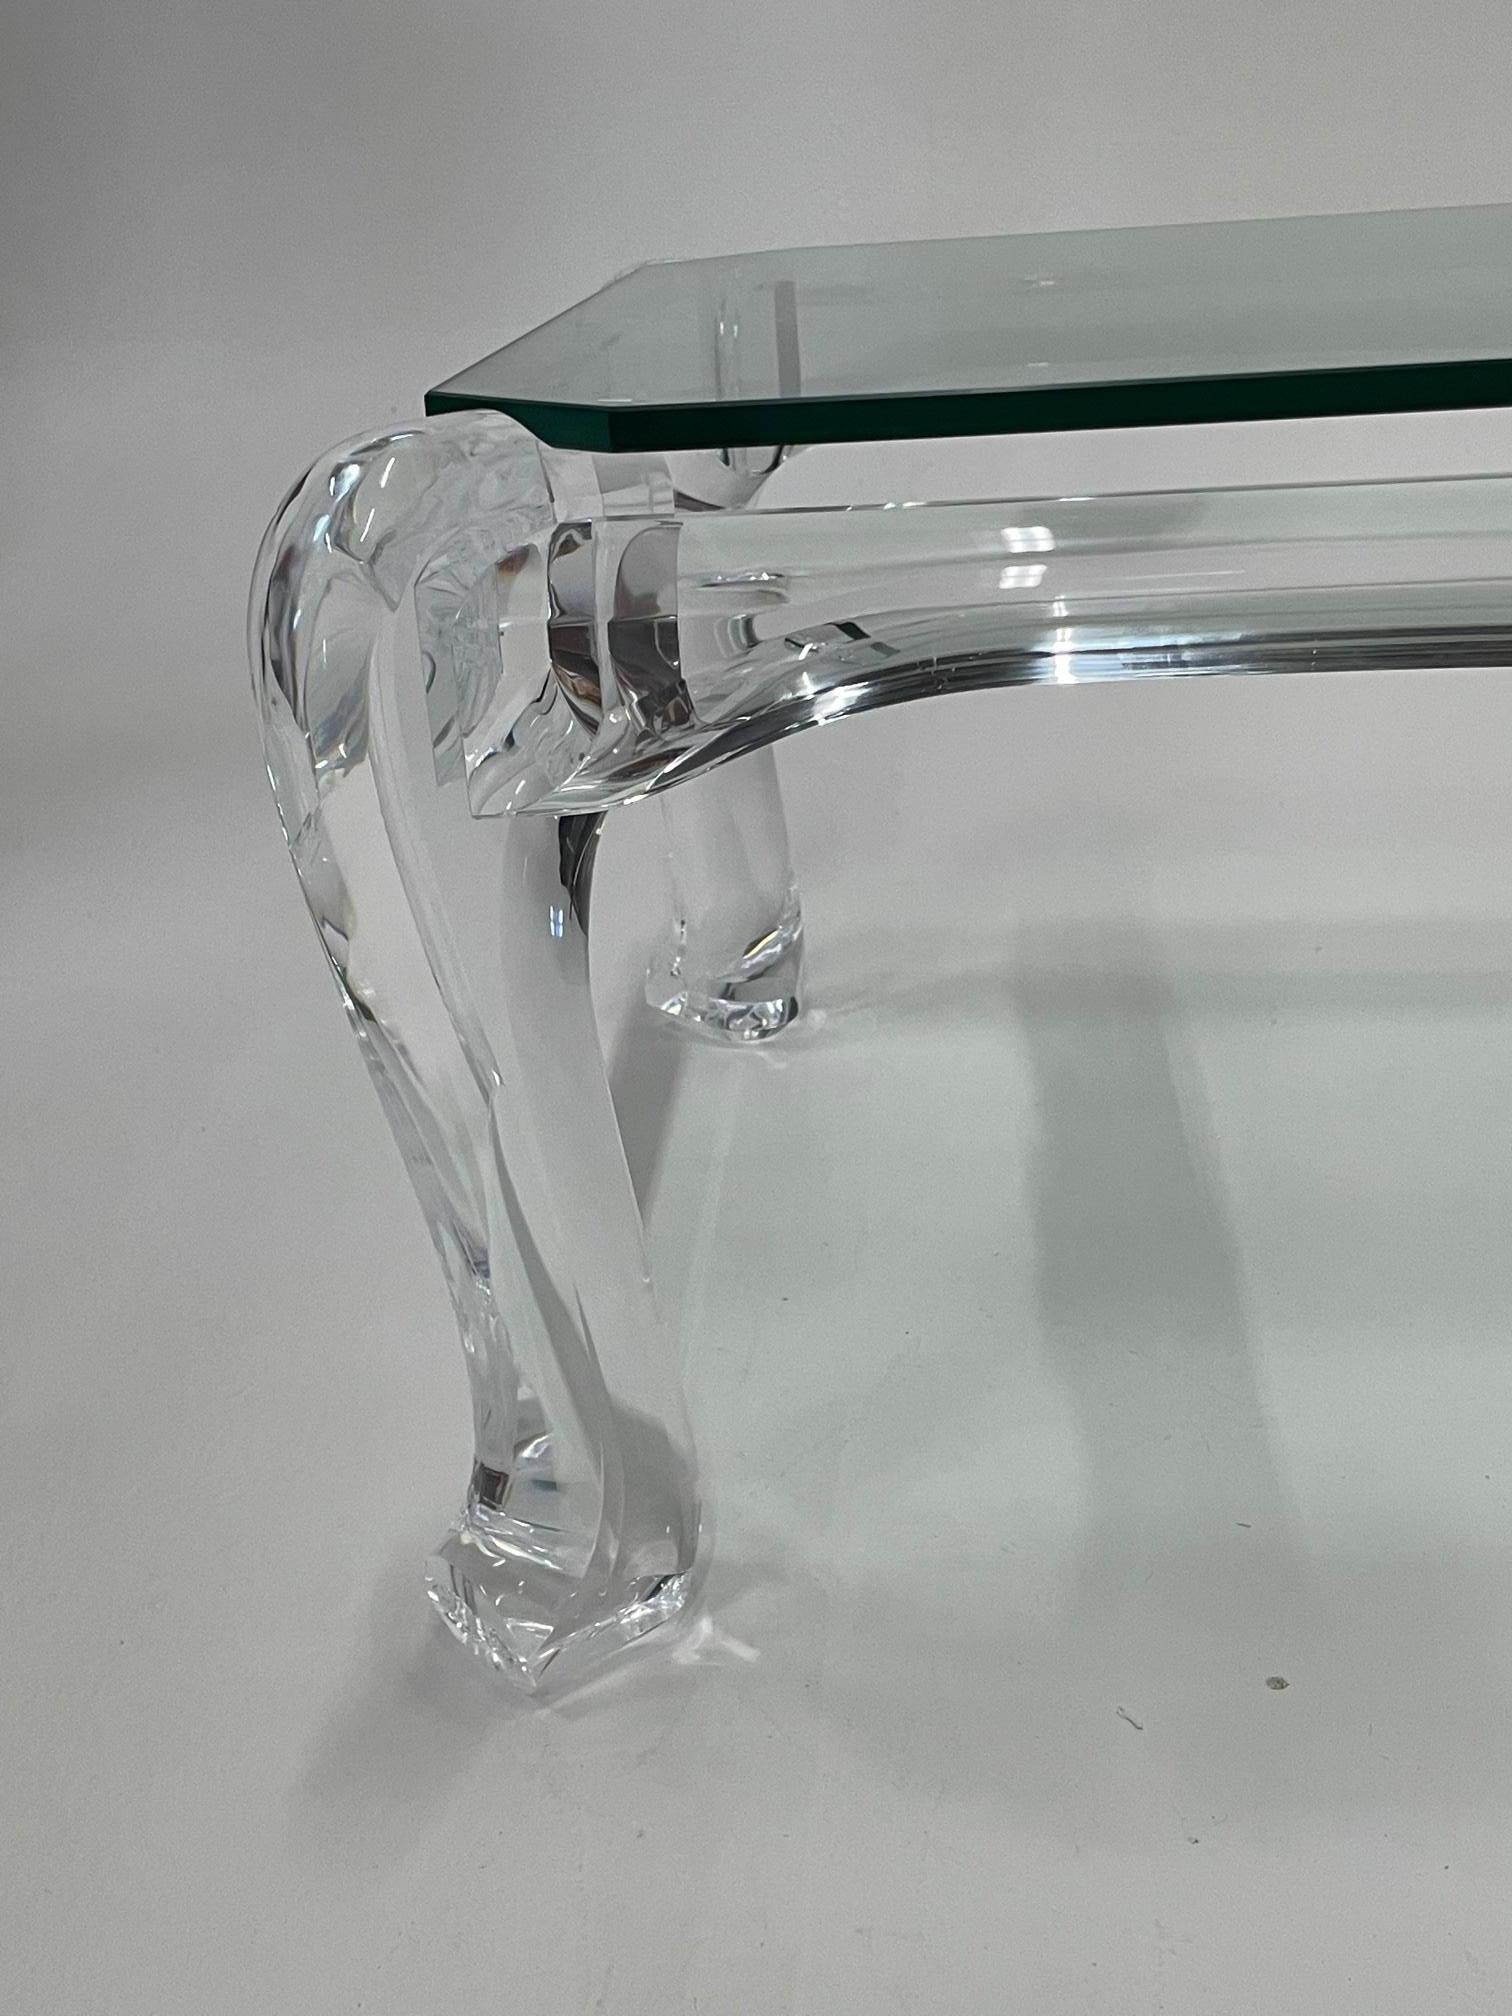 Super Hot Lucite Sculptural Mid-Century Modern Coffee Table For Sale 2